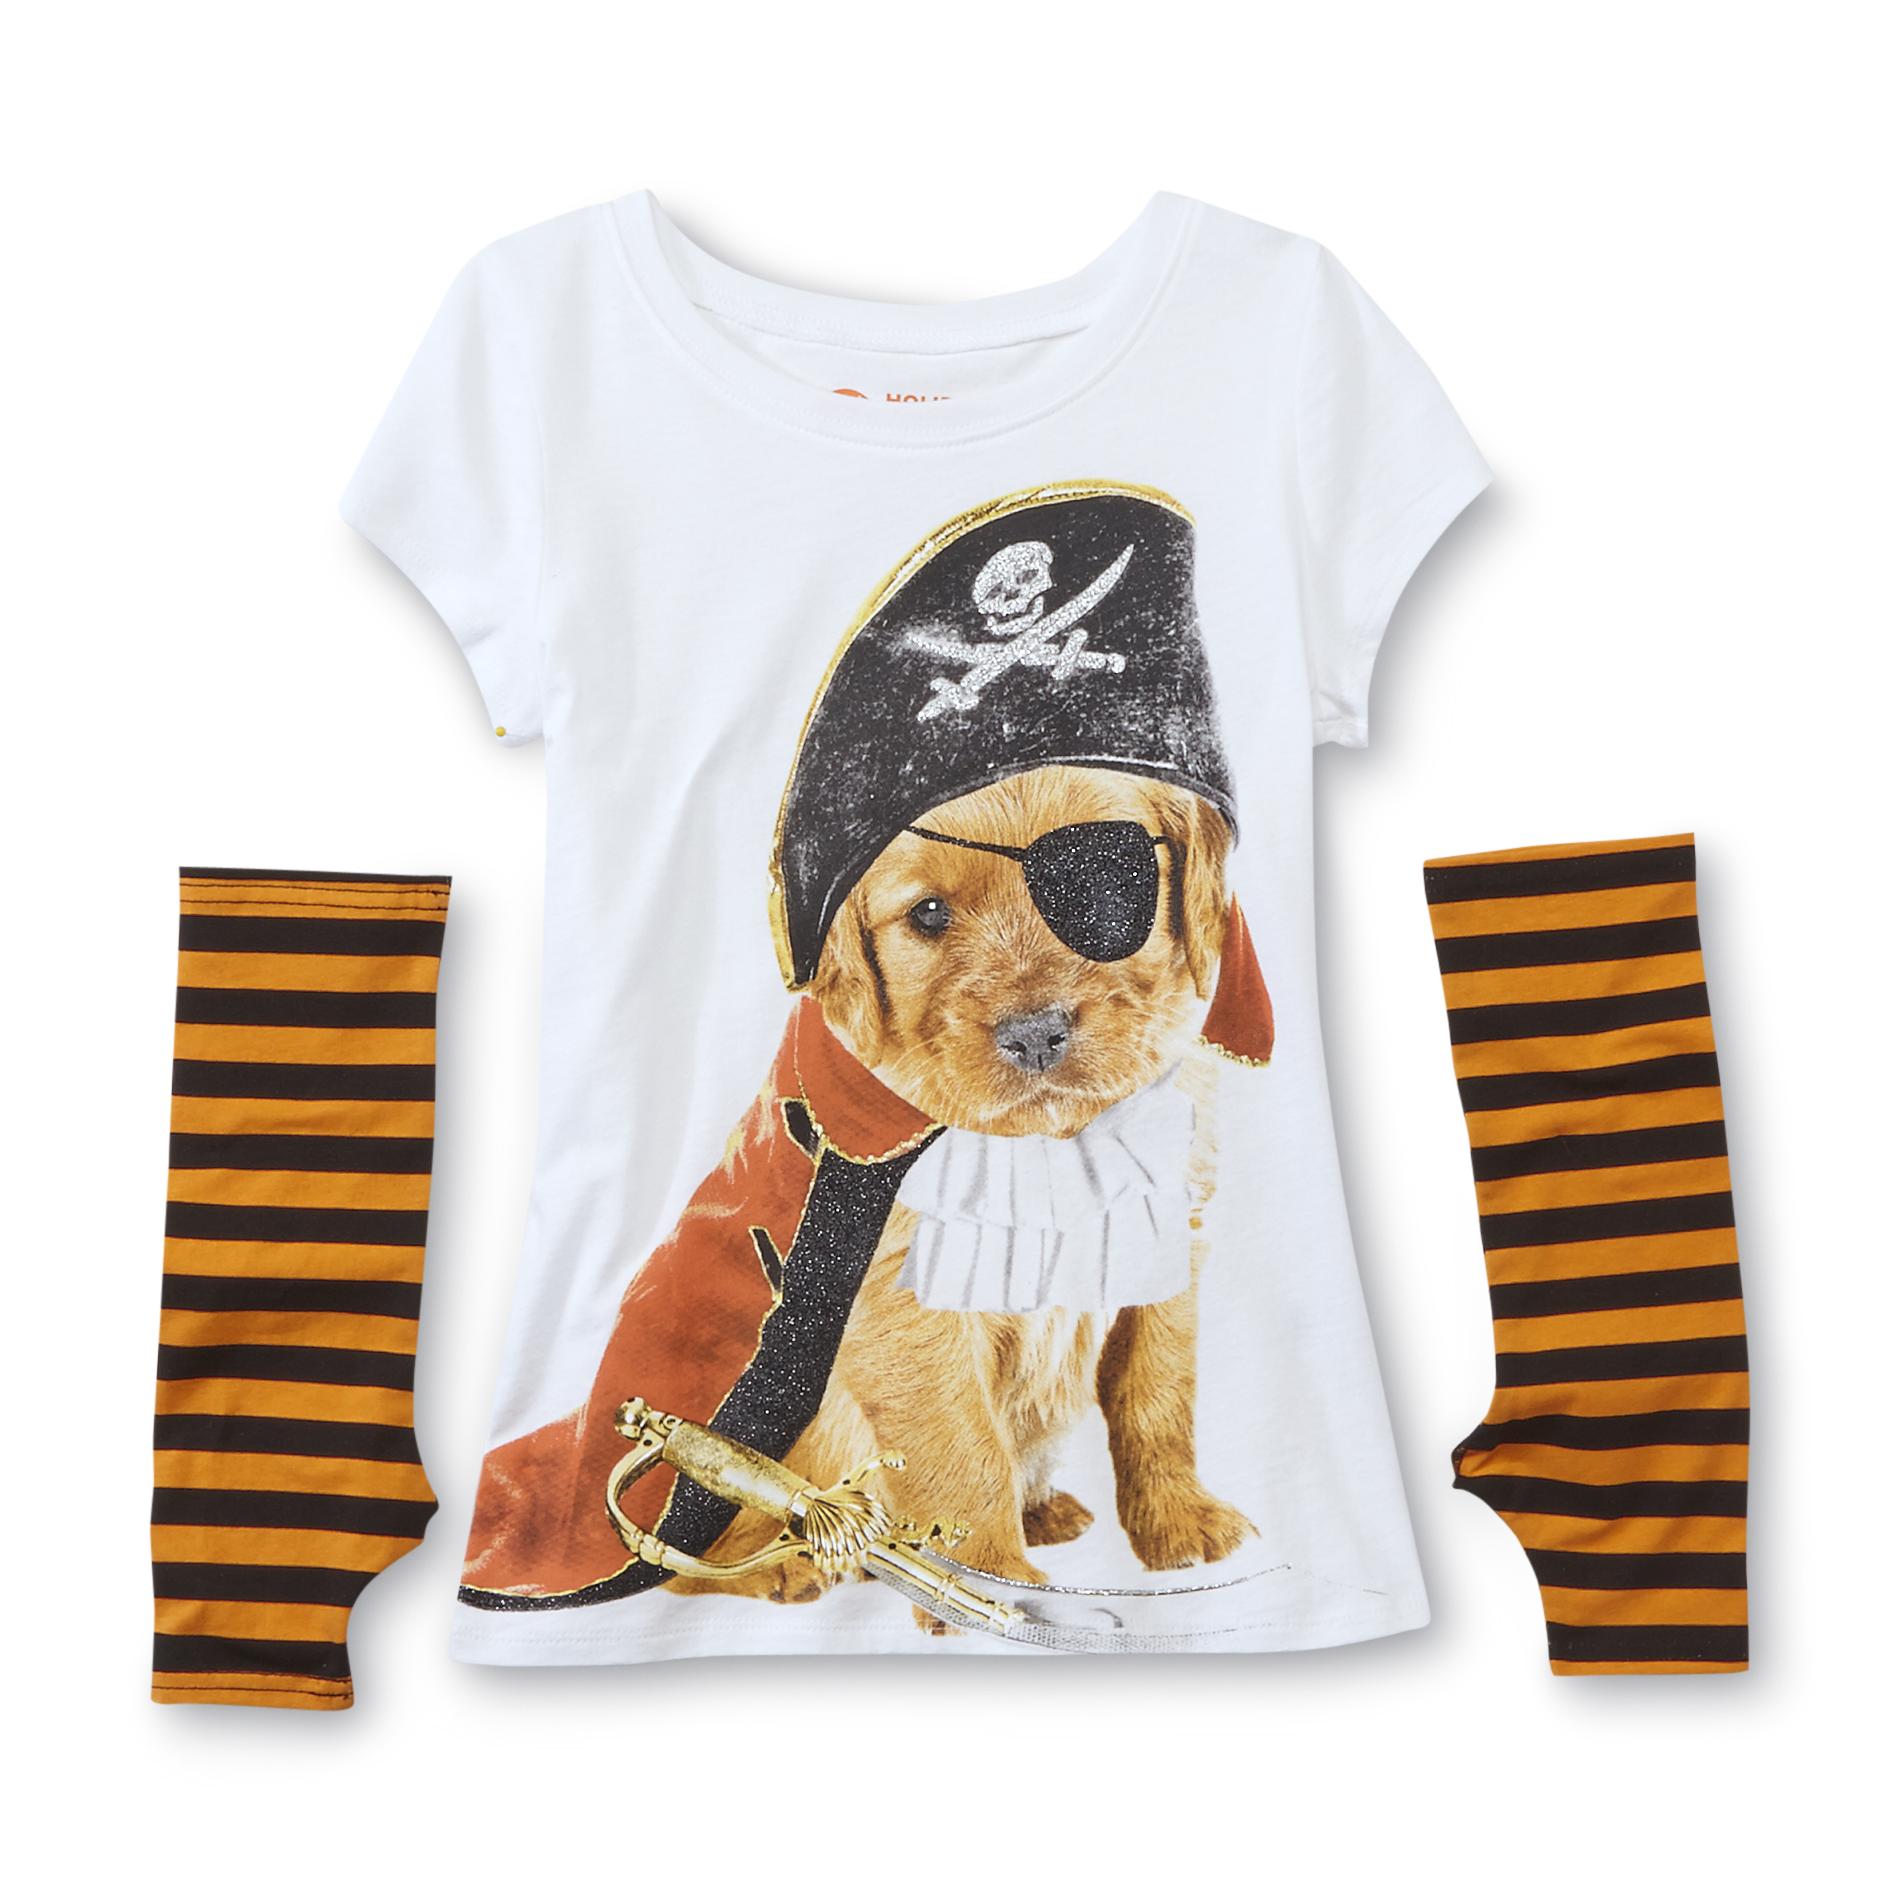 Holiday Editions Girl's Graphic T-Shirt & Arm Warmers - Pirate Pup